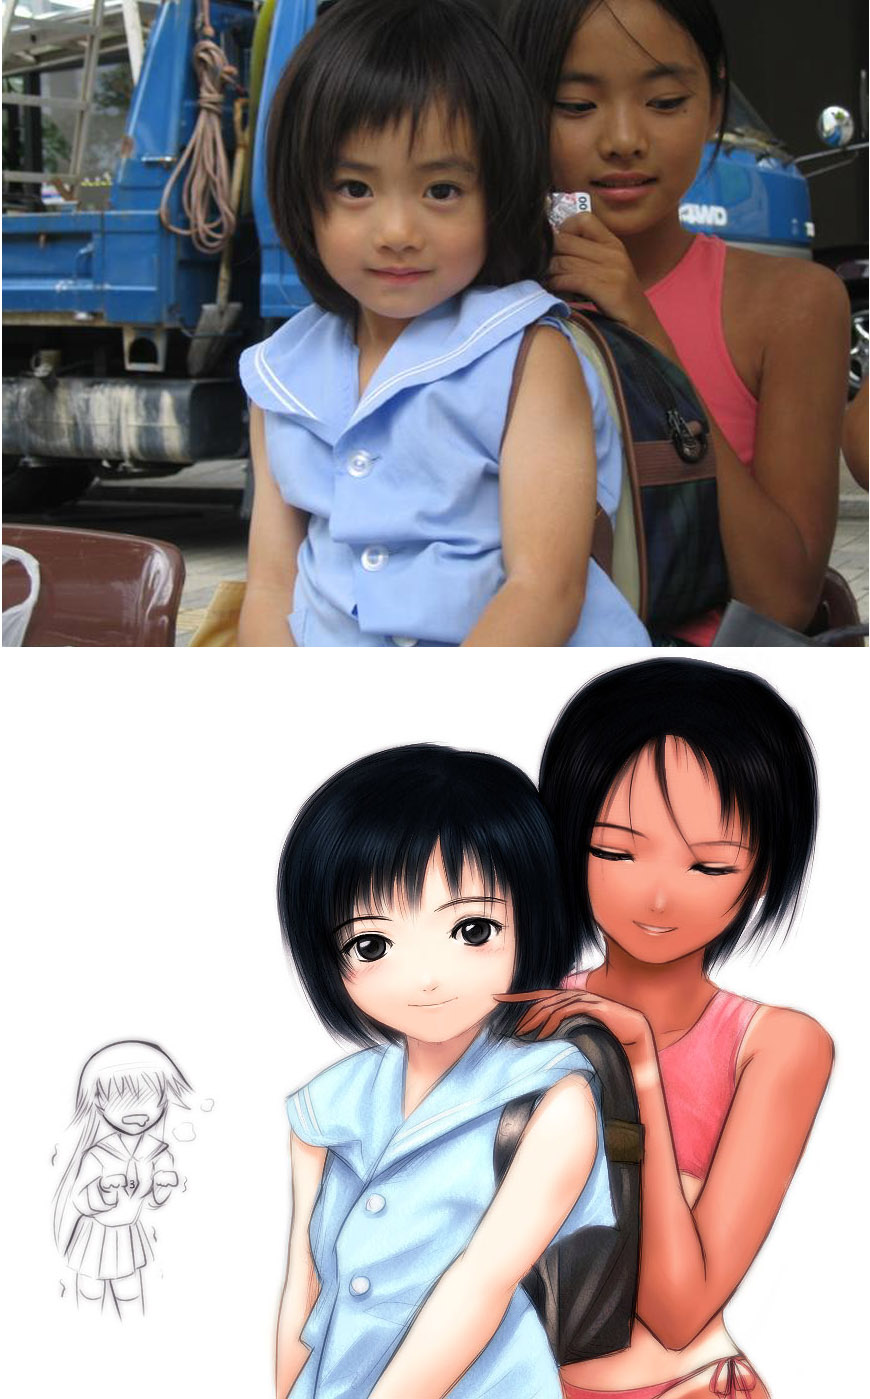 2girls asian child comparison derivative_work highres komica photo reference reference_photo reference_work s_zenith_lee